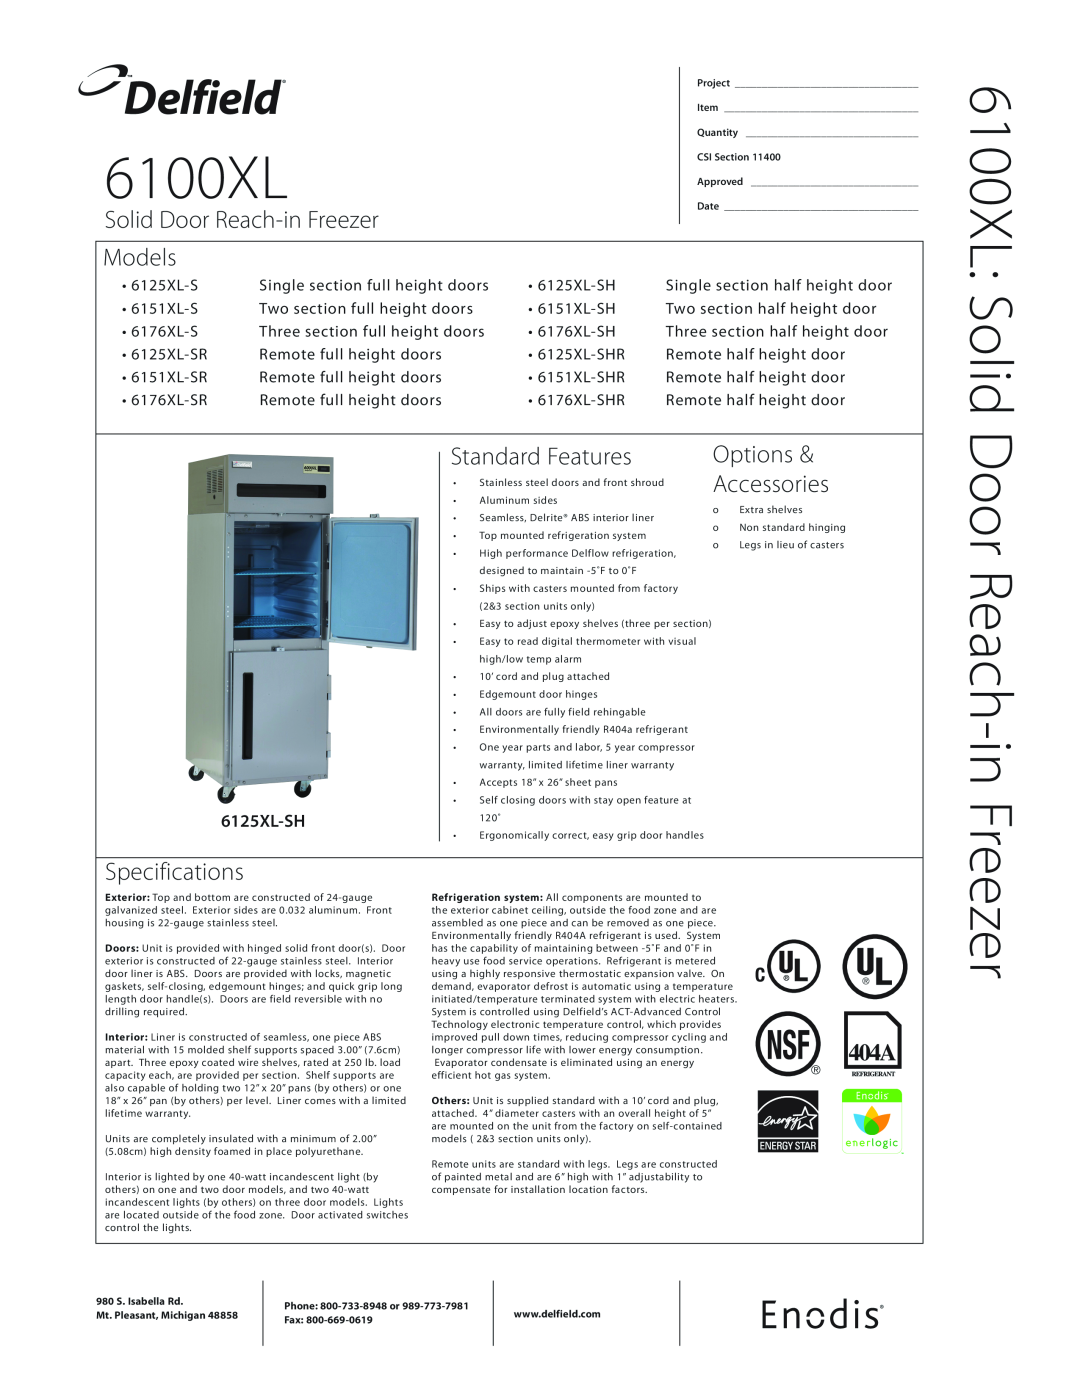 Delfield manual Delfield, 6000XL & 6100XL Series Reach Ins, Service, Installation and Care Manual, Information, March 